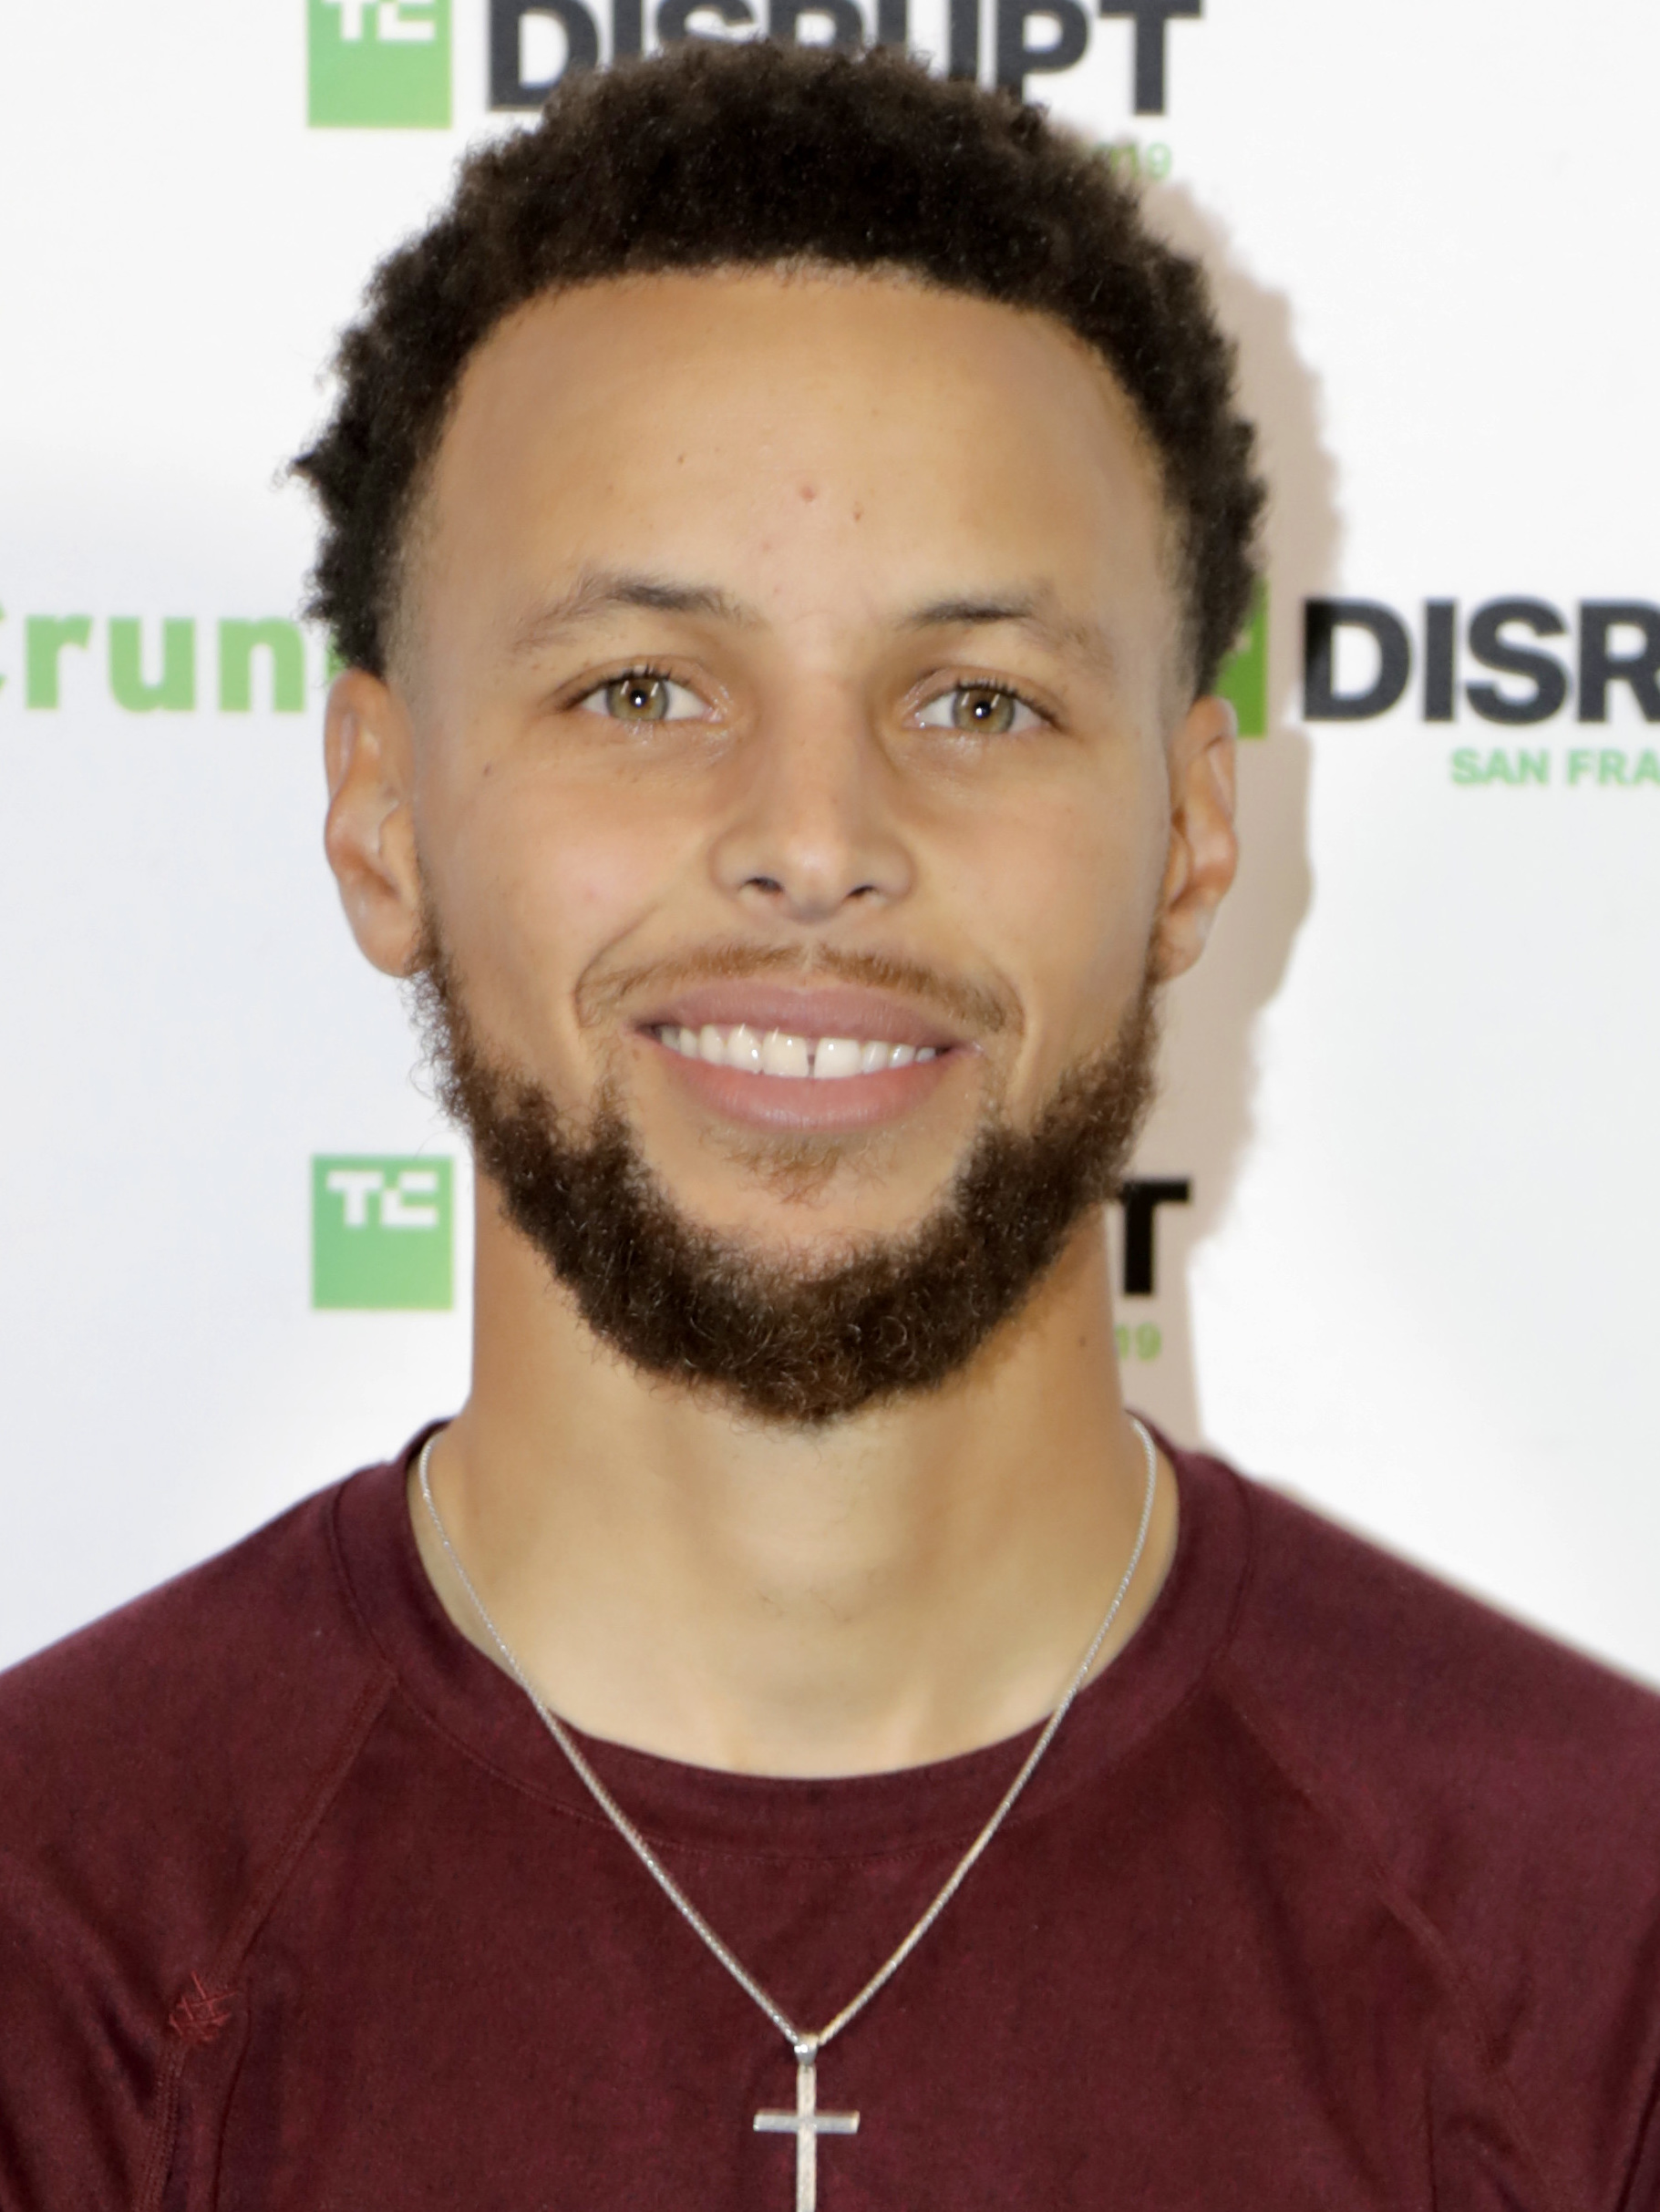 Inspiredlovers DEJI-CURRY-CURRY Steph Curry buys luxury home in Florida with crazy amount of million dollars NBA Sports  Stephen Curry NBA 